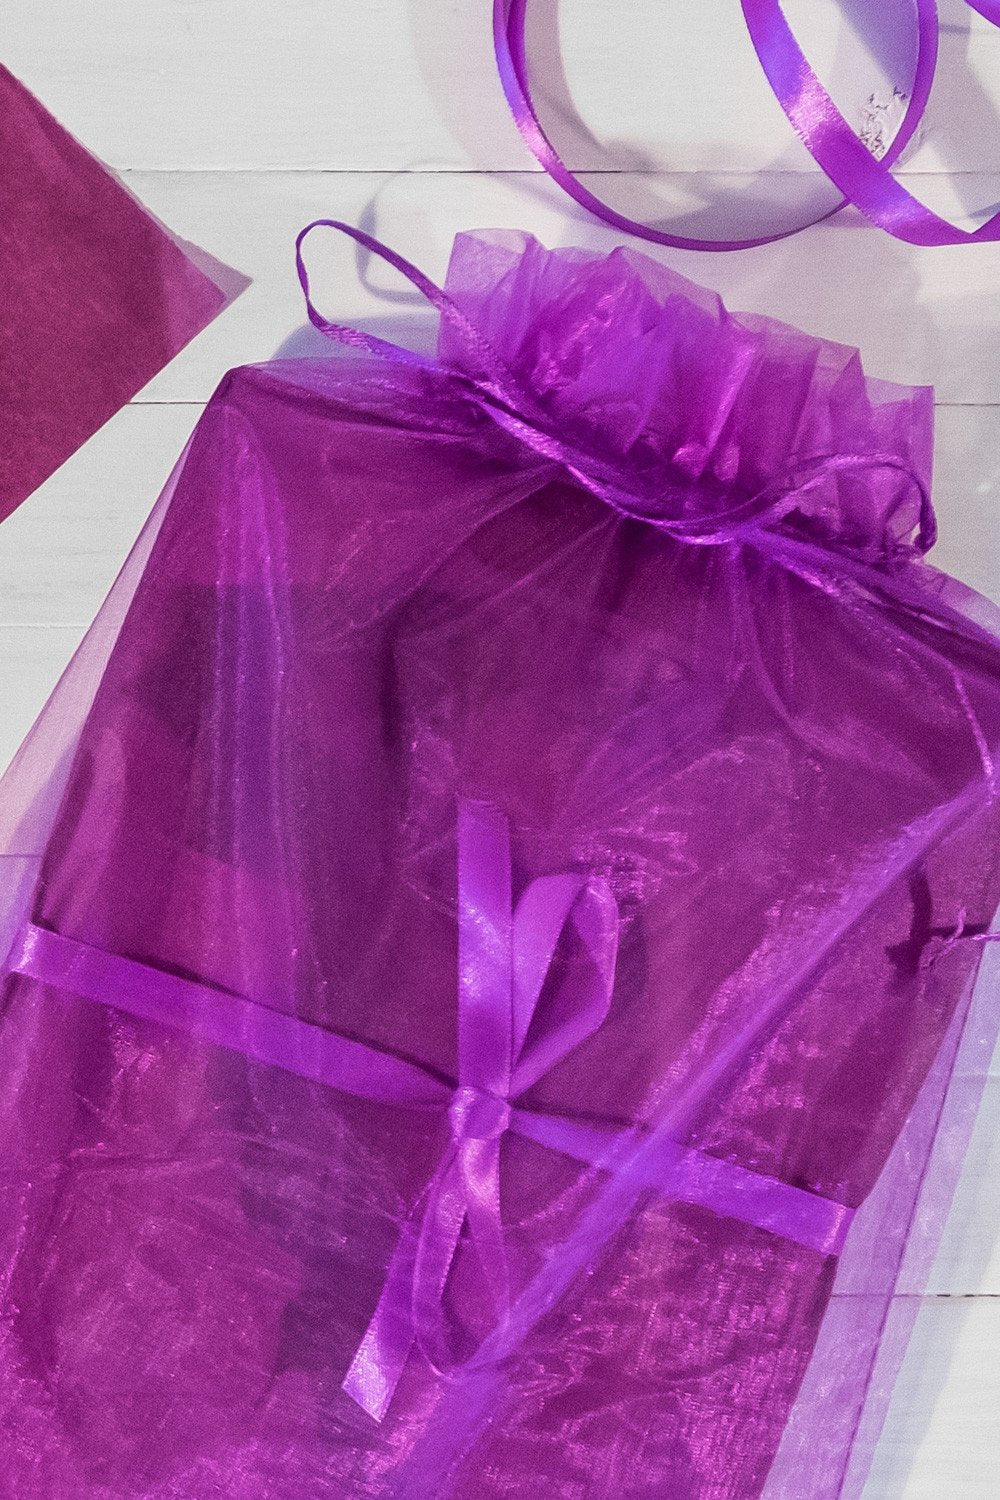 Organza Gift and Storage Bag - The Hosiery Box